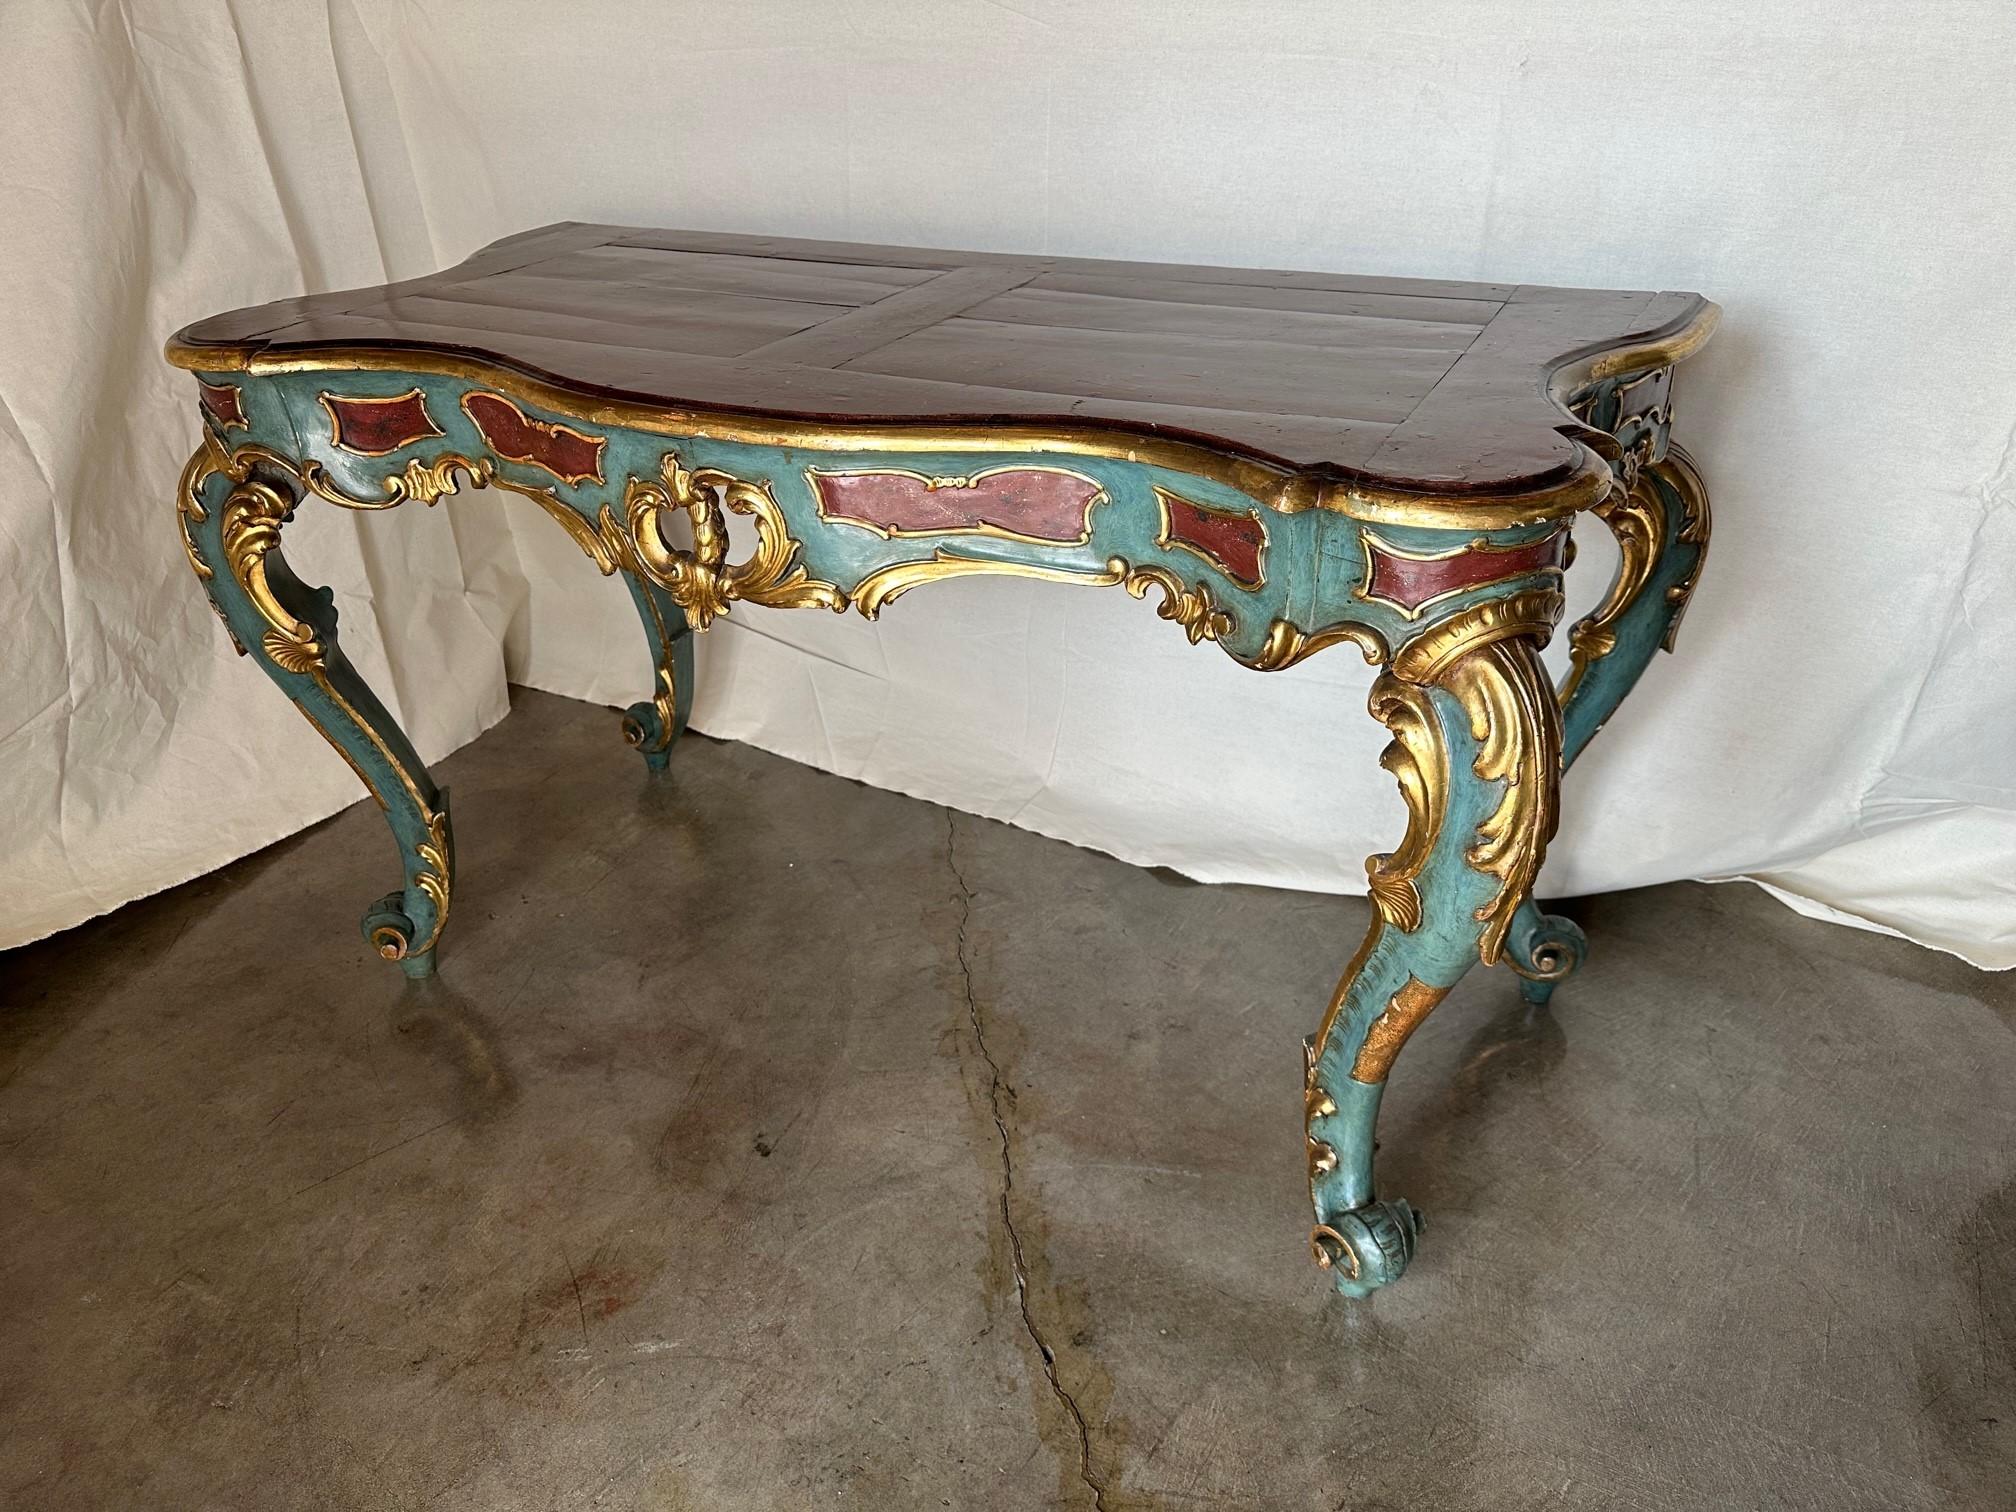 Venetian Rococo Gilt Painted Faux Stone Console Entry Table Office Desk Antique In Good Condition For Sale In West Hollywood, CA